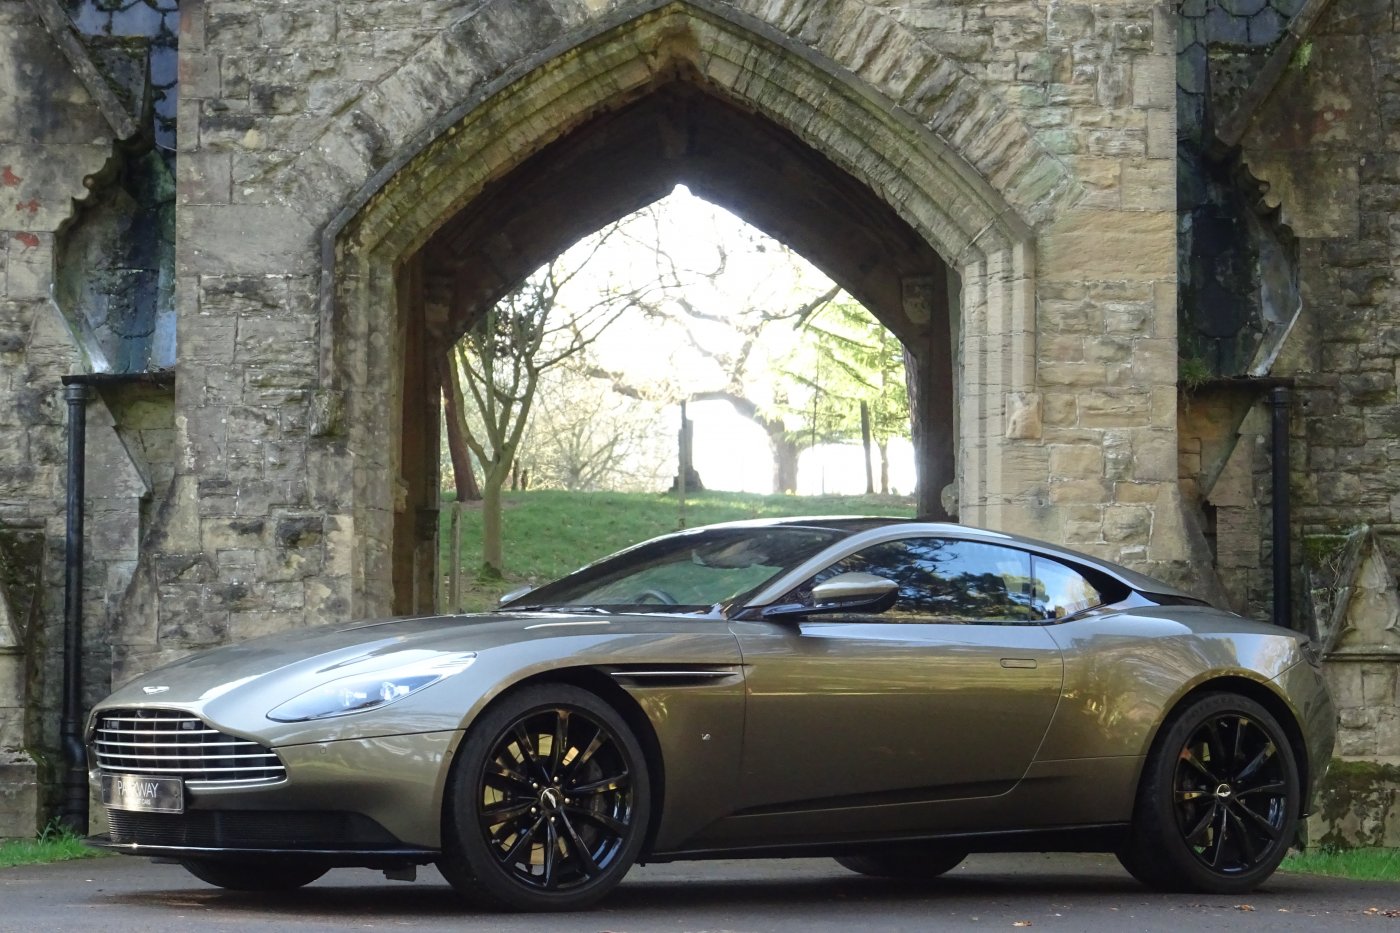 http://www.parkwayspecialistcars.co.uk/uploads/product/zoom_ASTON_MARTIN_DB11_V12_COUPE_2DR_AUTO_26.jpg